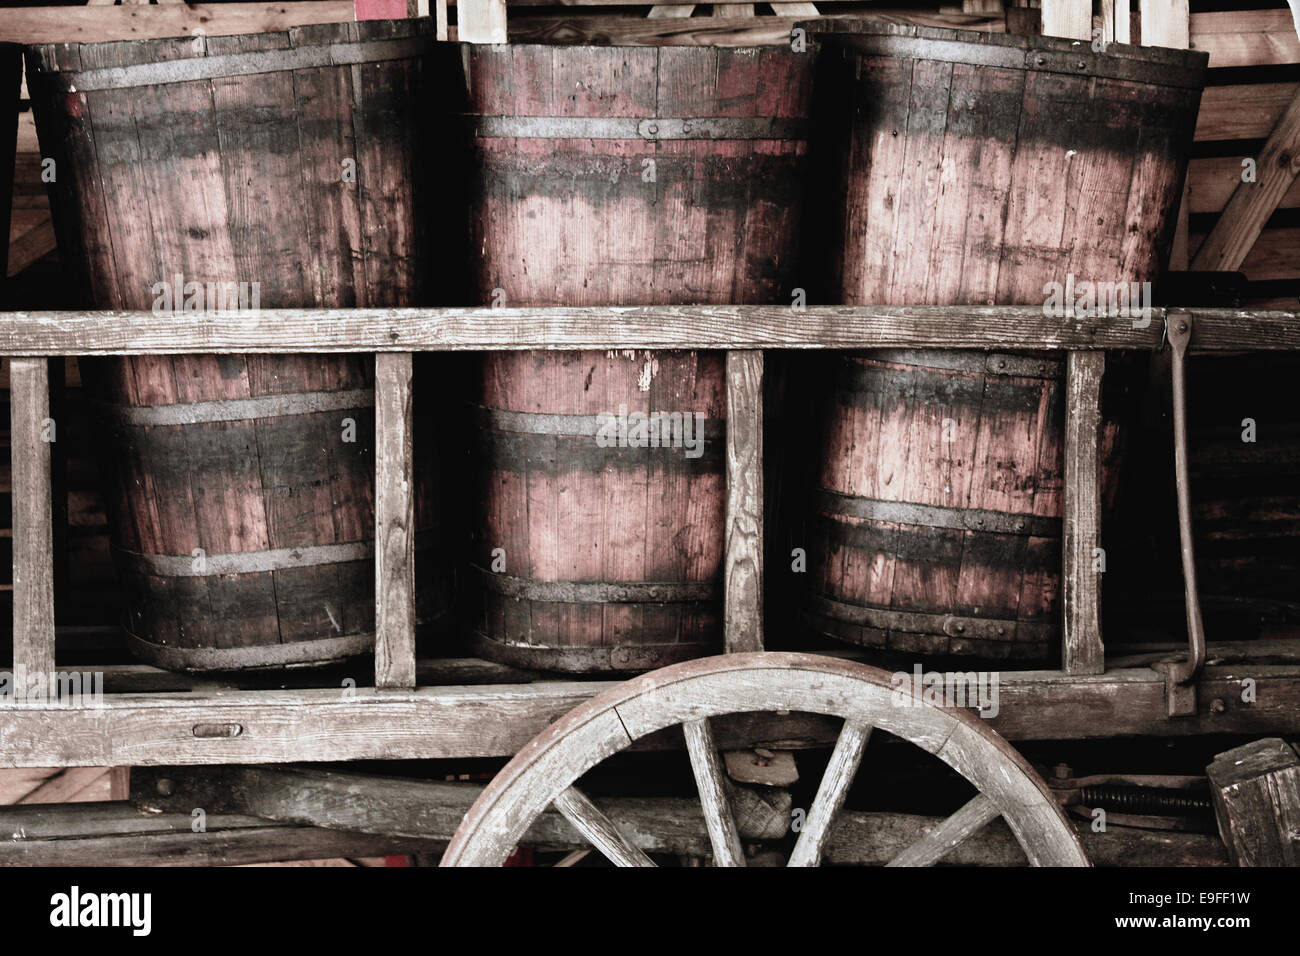 Old wooden vats, Alsace, France Stock Photo